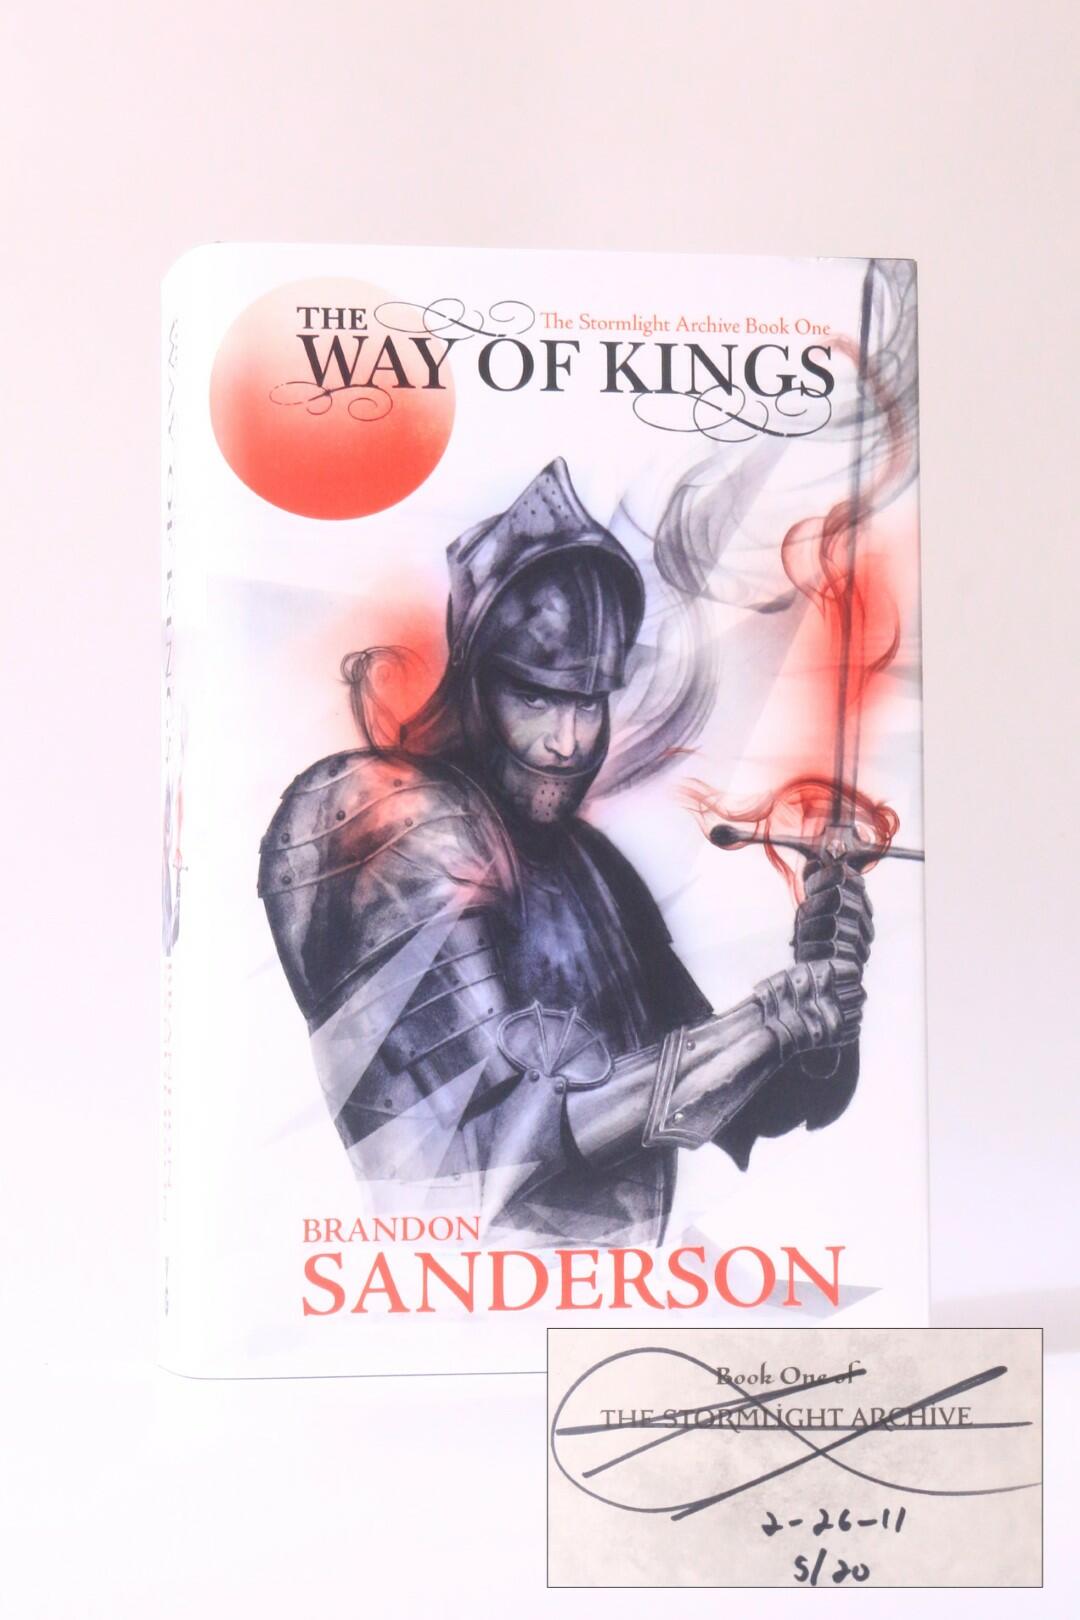 Brandon Sanderson - The Way of Kings: The Stormlight Archive Book One - Gollancz, 2010, First Edition.  Signed